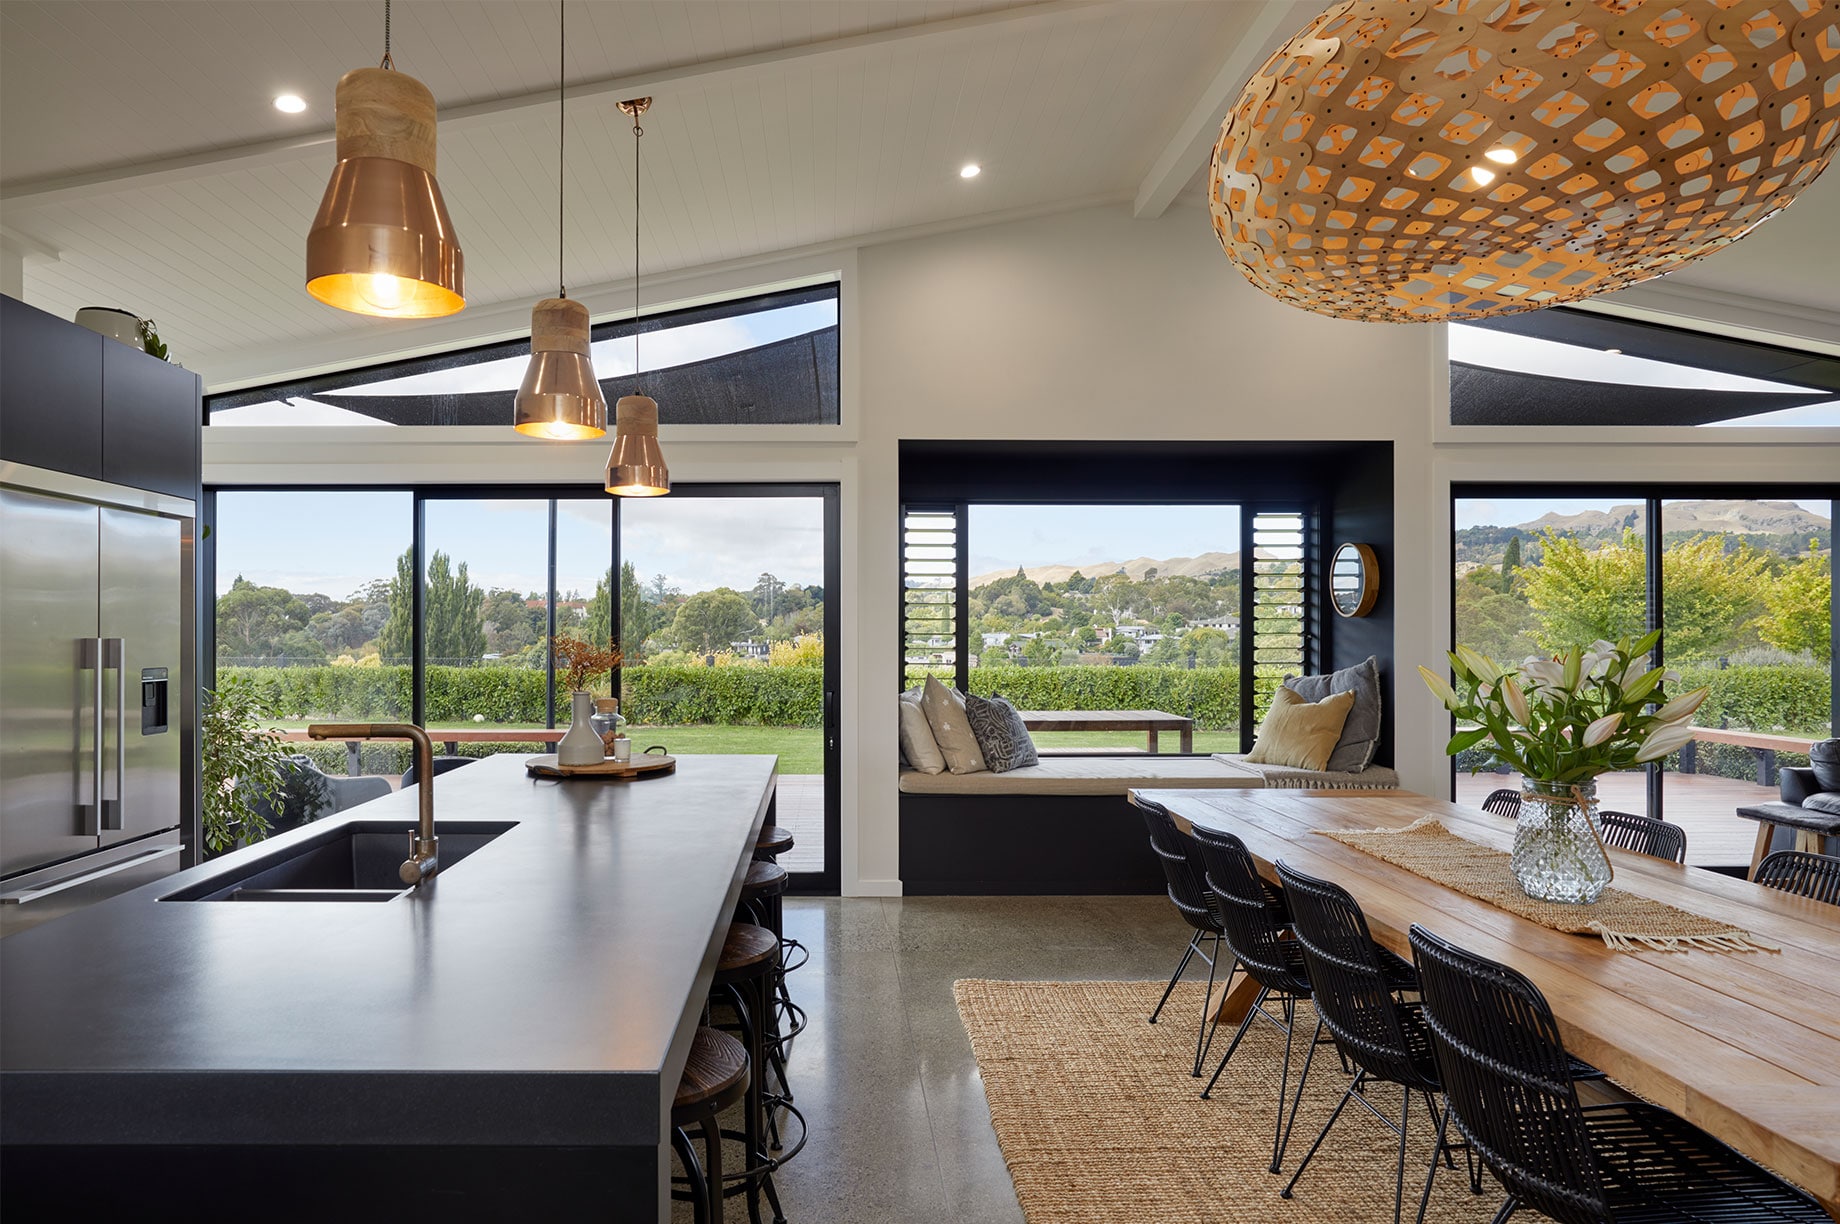 Kitchen and dining interior overlooking hills